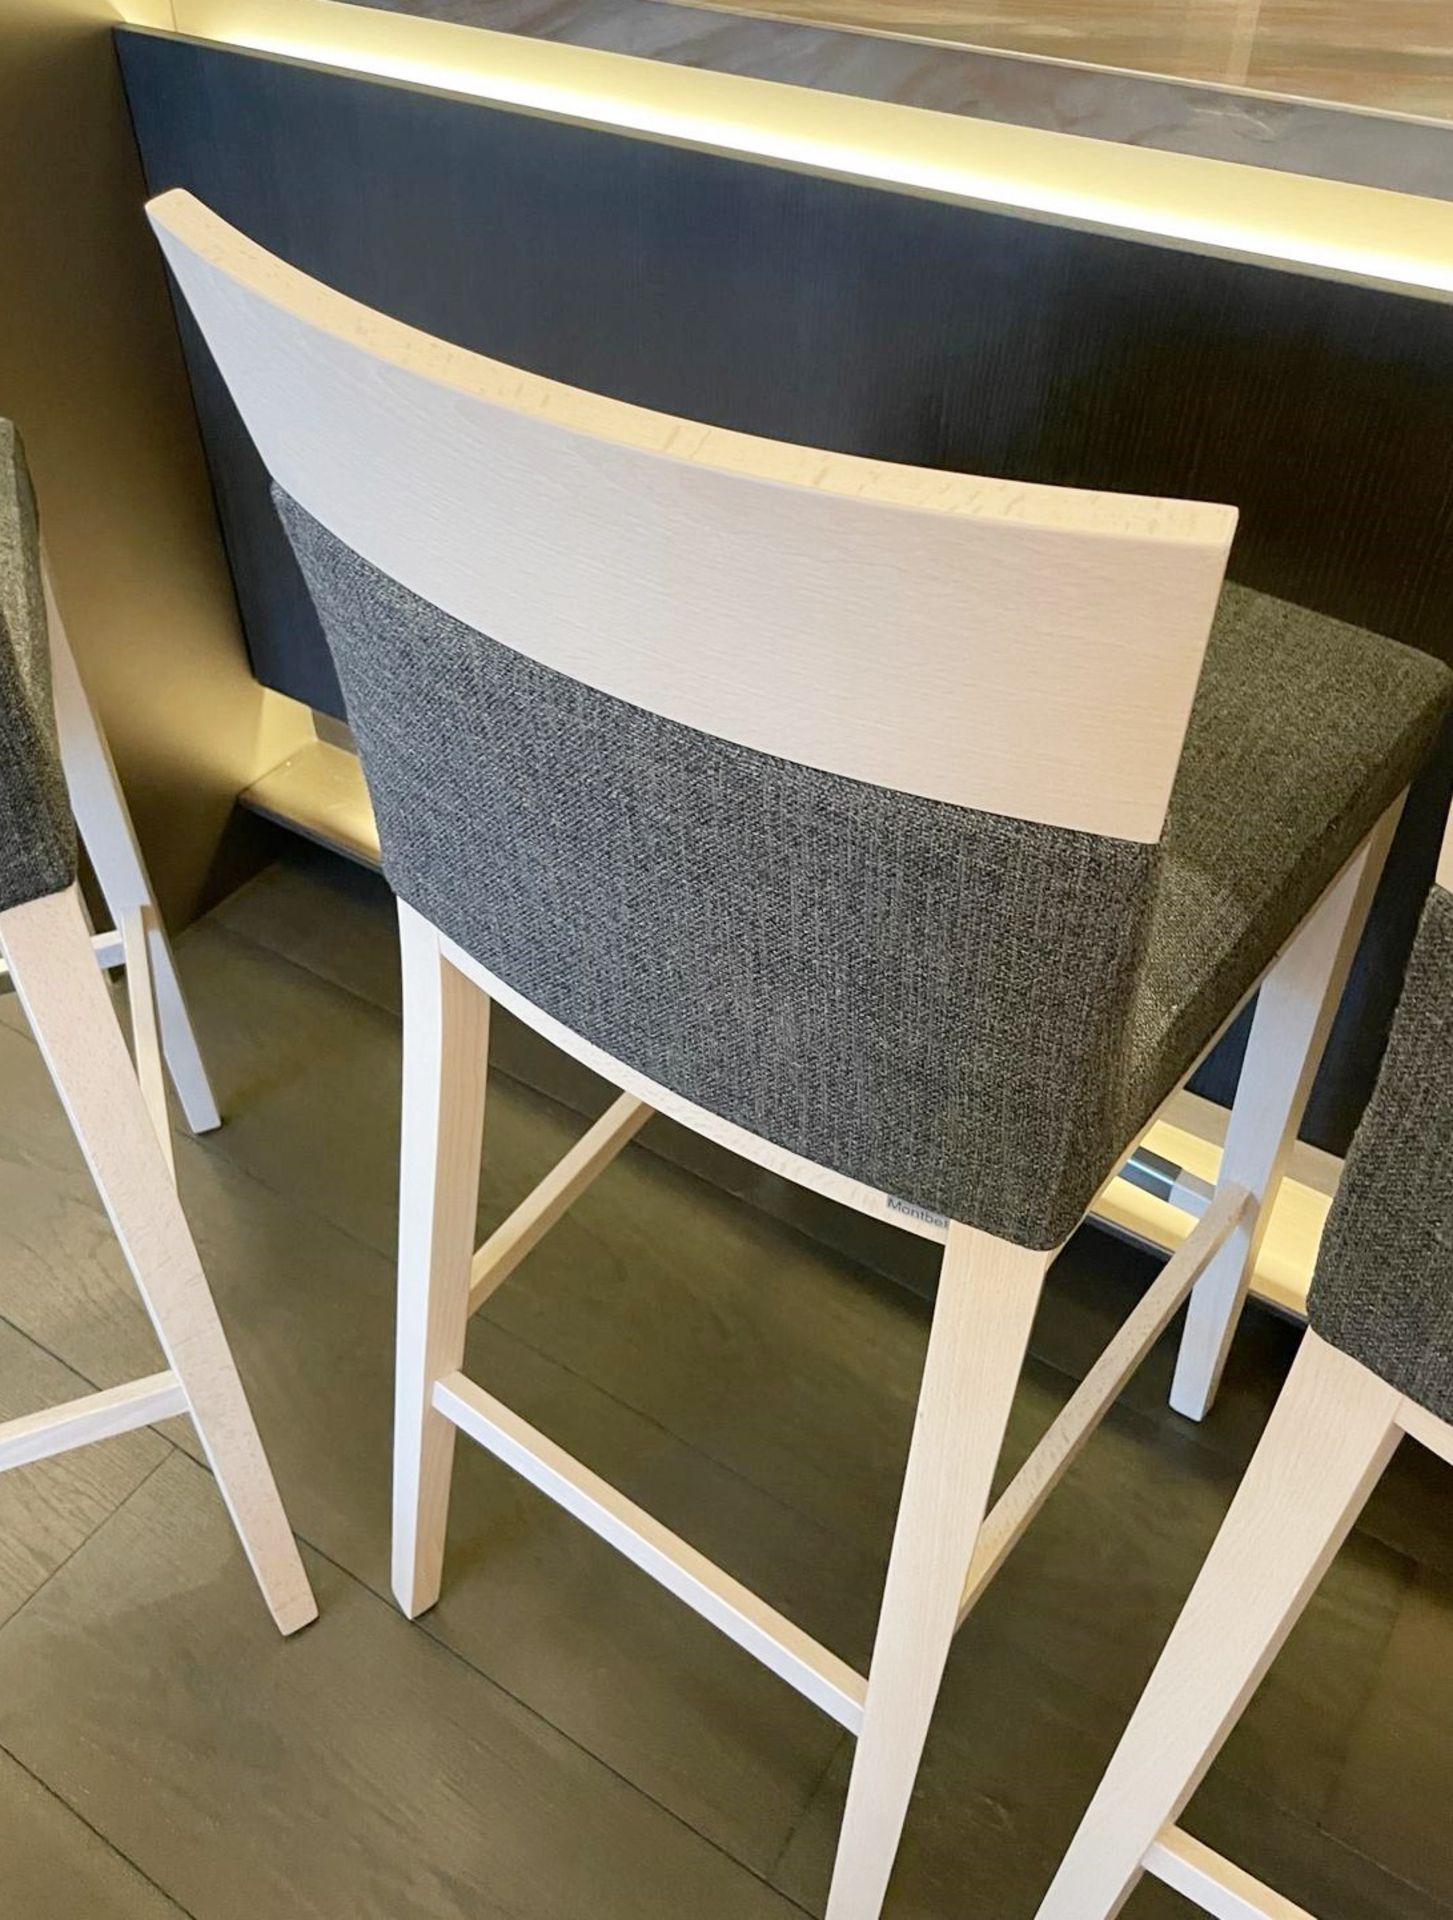 3 x MONTBEL Designer Bar Stools With Light Stained Frames And Grey Fabric Upholstery - Image 4 of 18